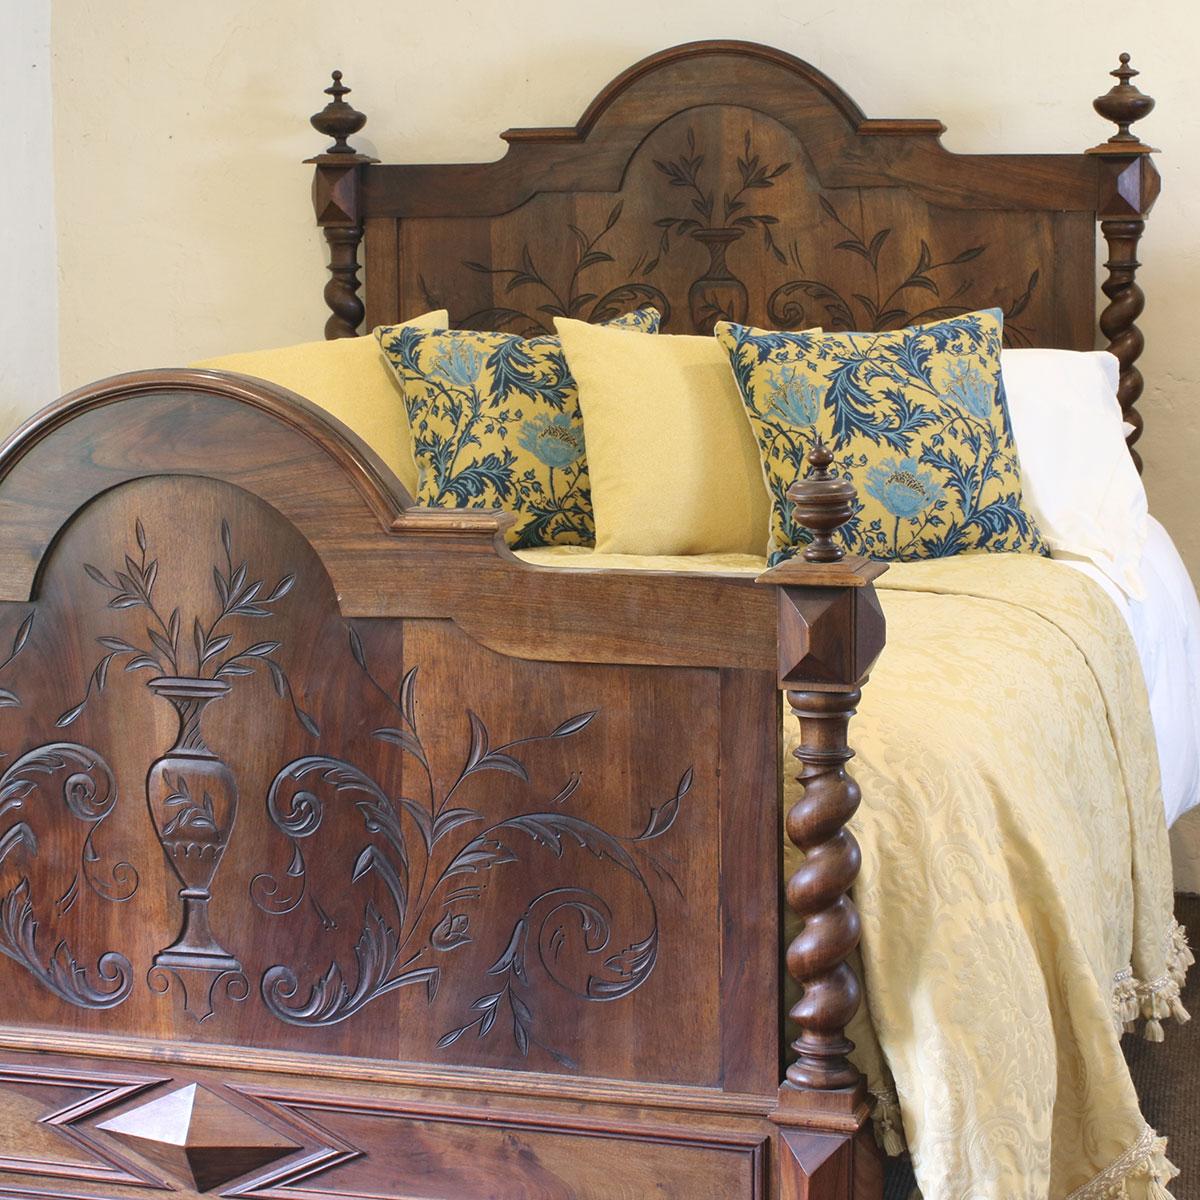 An attractive carved walnut bed with barley twist posts and decorative panels.

This bed accepts a British King size or American Queen size, 5ft wide (60 inches or 150cm) base and mattress set.

The price includes a standard firm bed base to